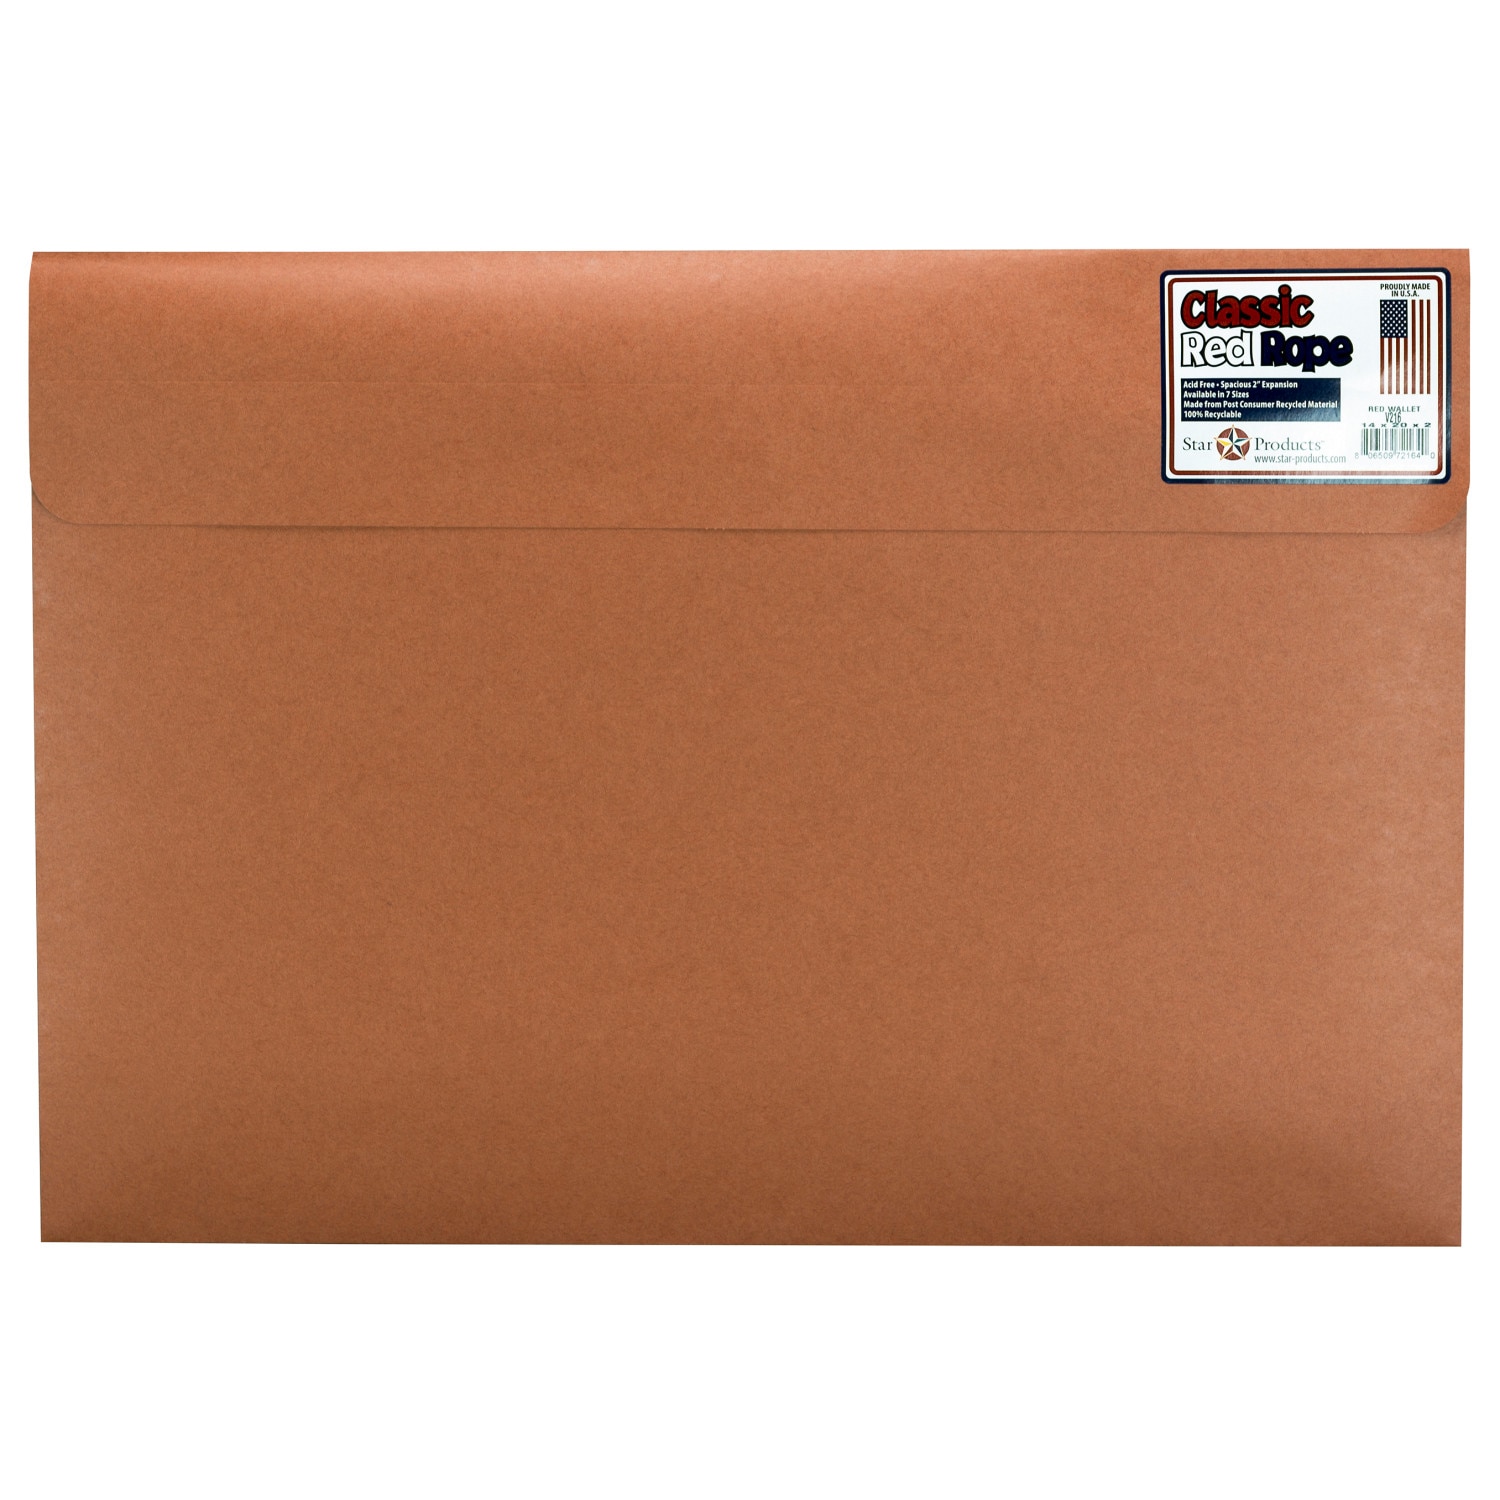 Star Products Red Fiber Art Envelope, 23" x 31"